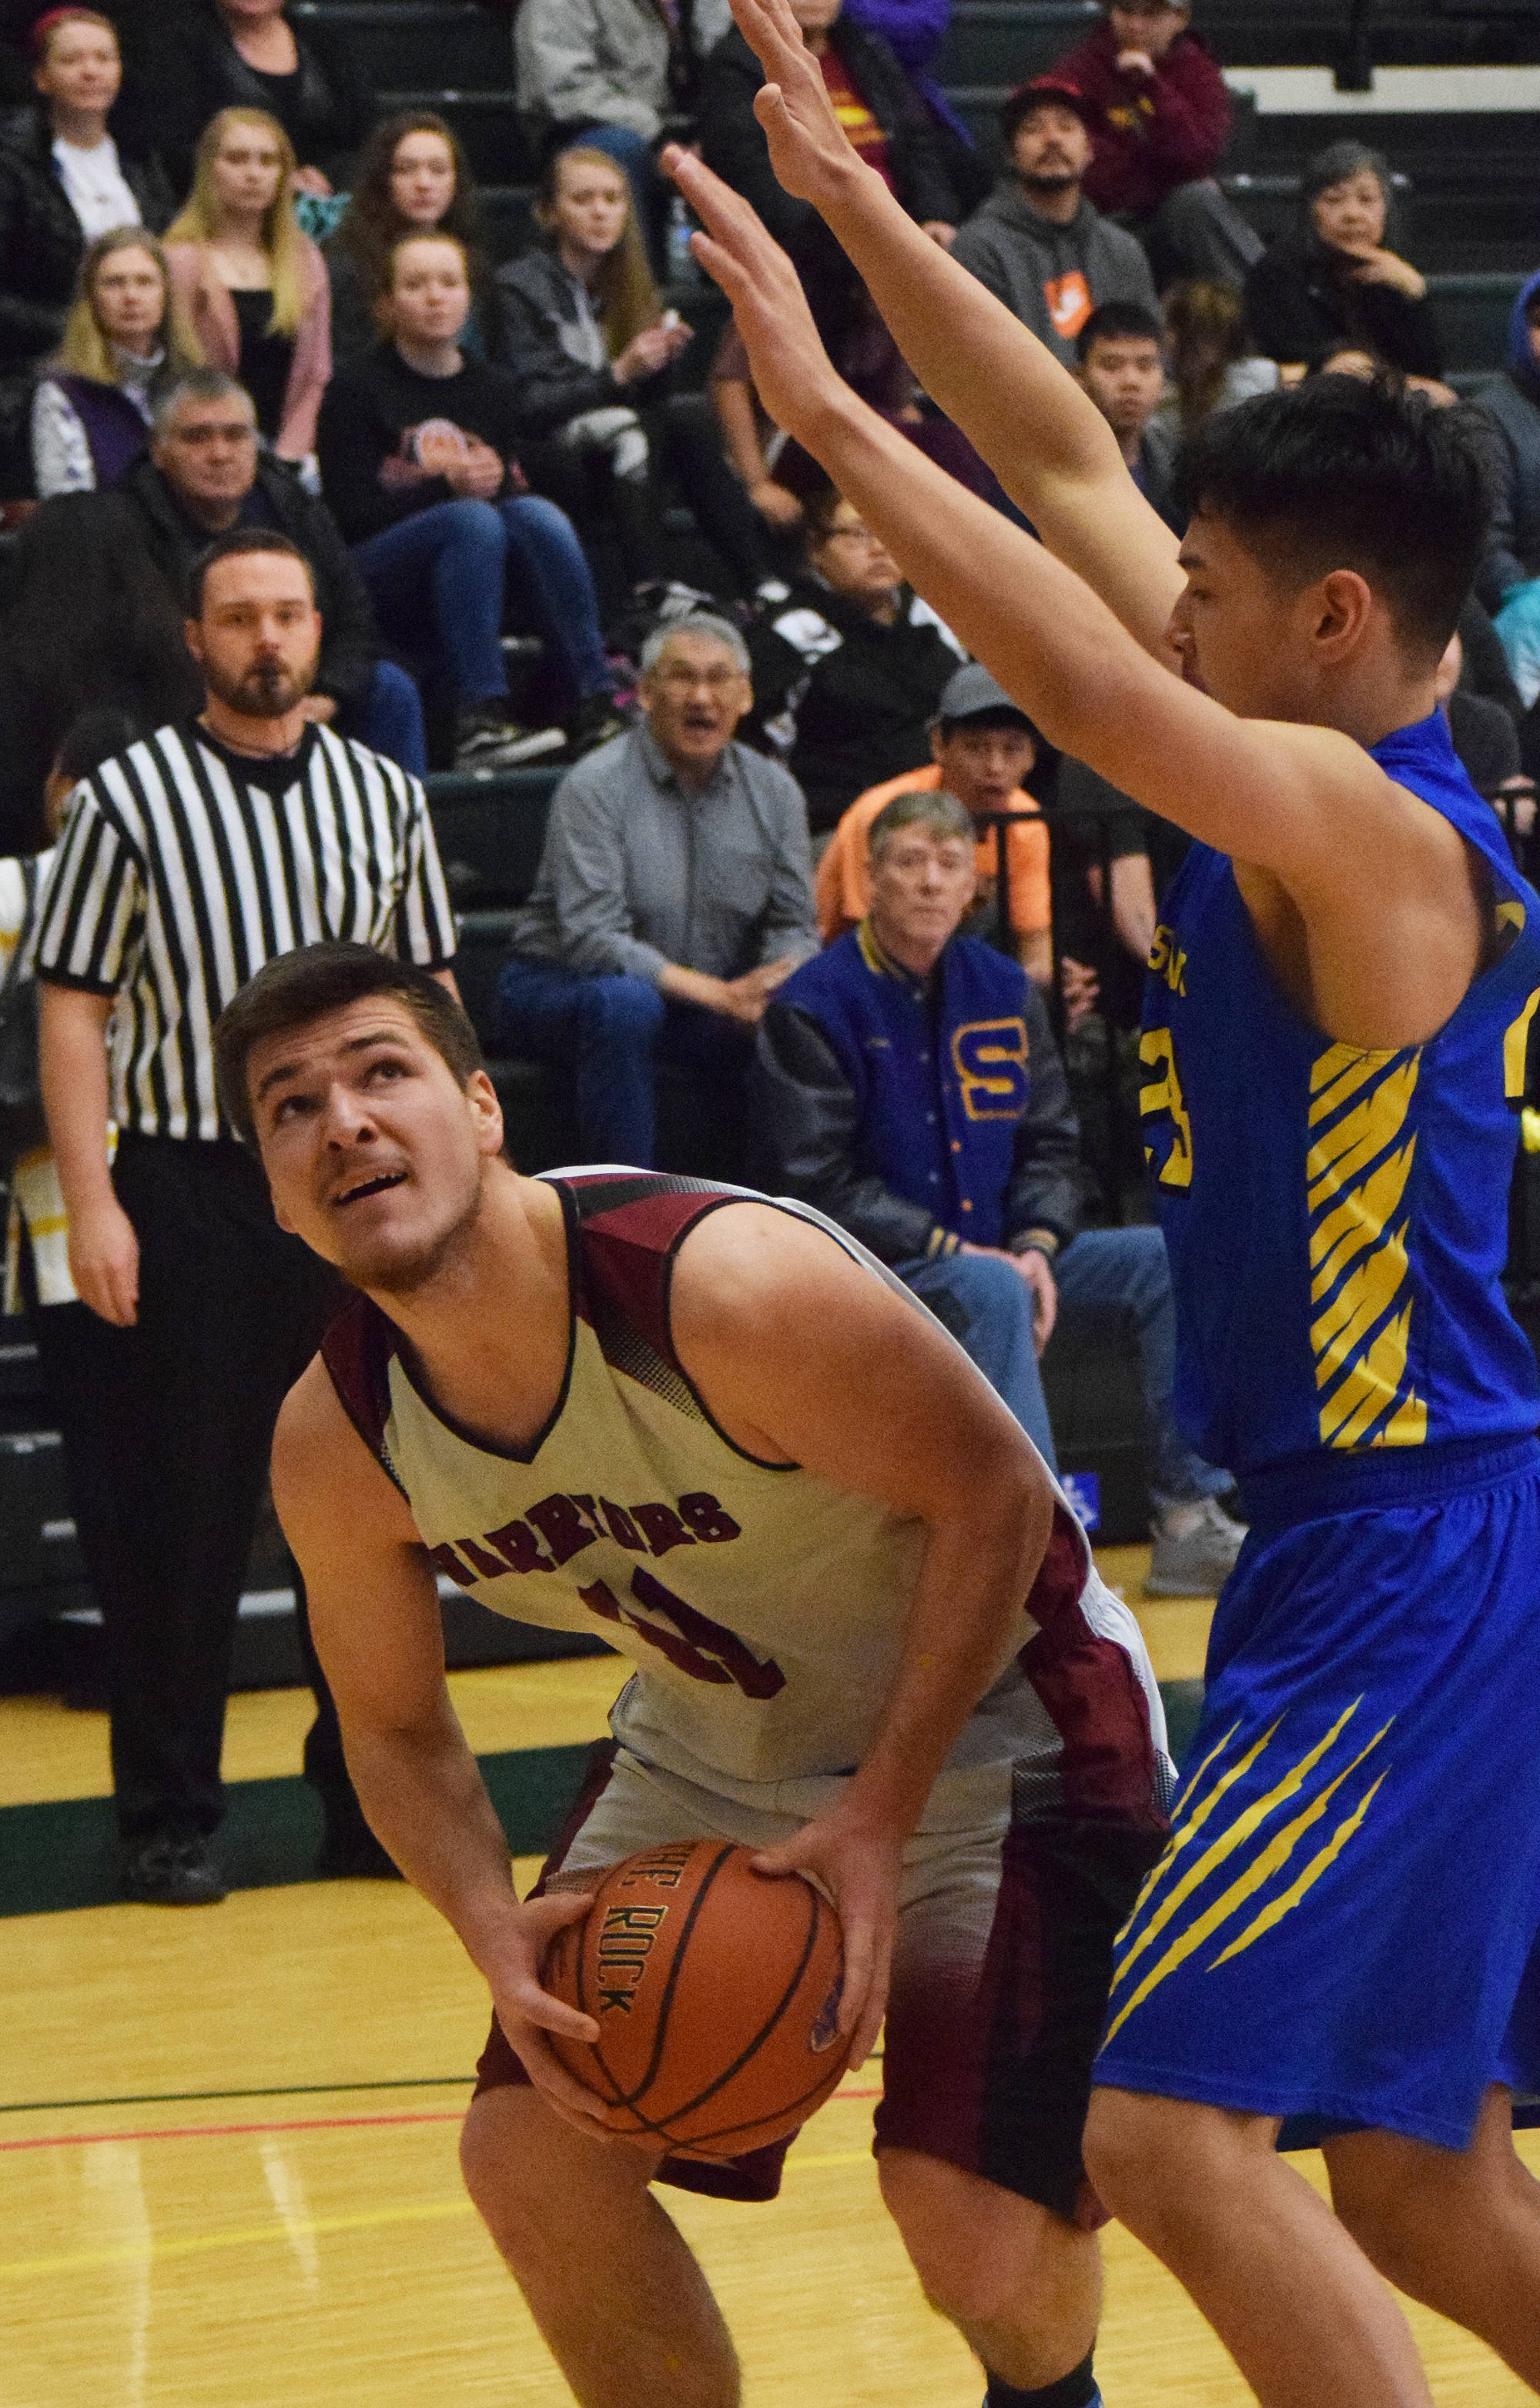 Nikolaevsk’s Michael Trail (left) attempts a shot under Savoonga’s Derek Seppilu Friday at the Class 1A state tournament at the Alaska Airlines Center in Anchorage. (Photo by Joey Klecka/Peninsula Clarion)